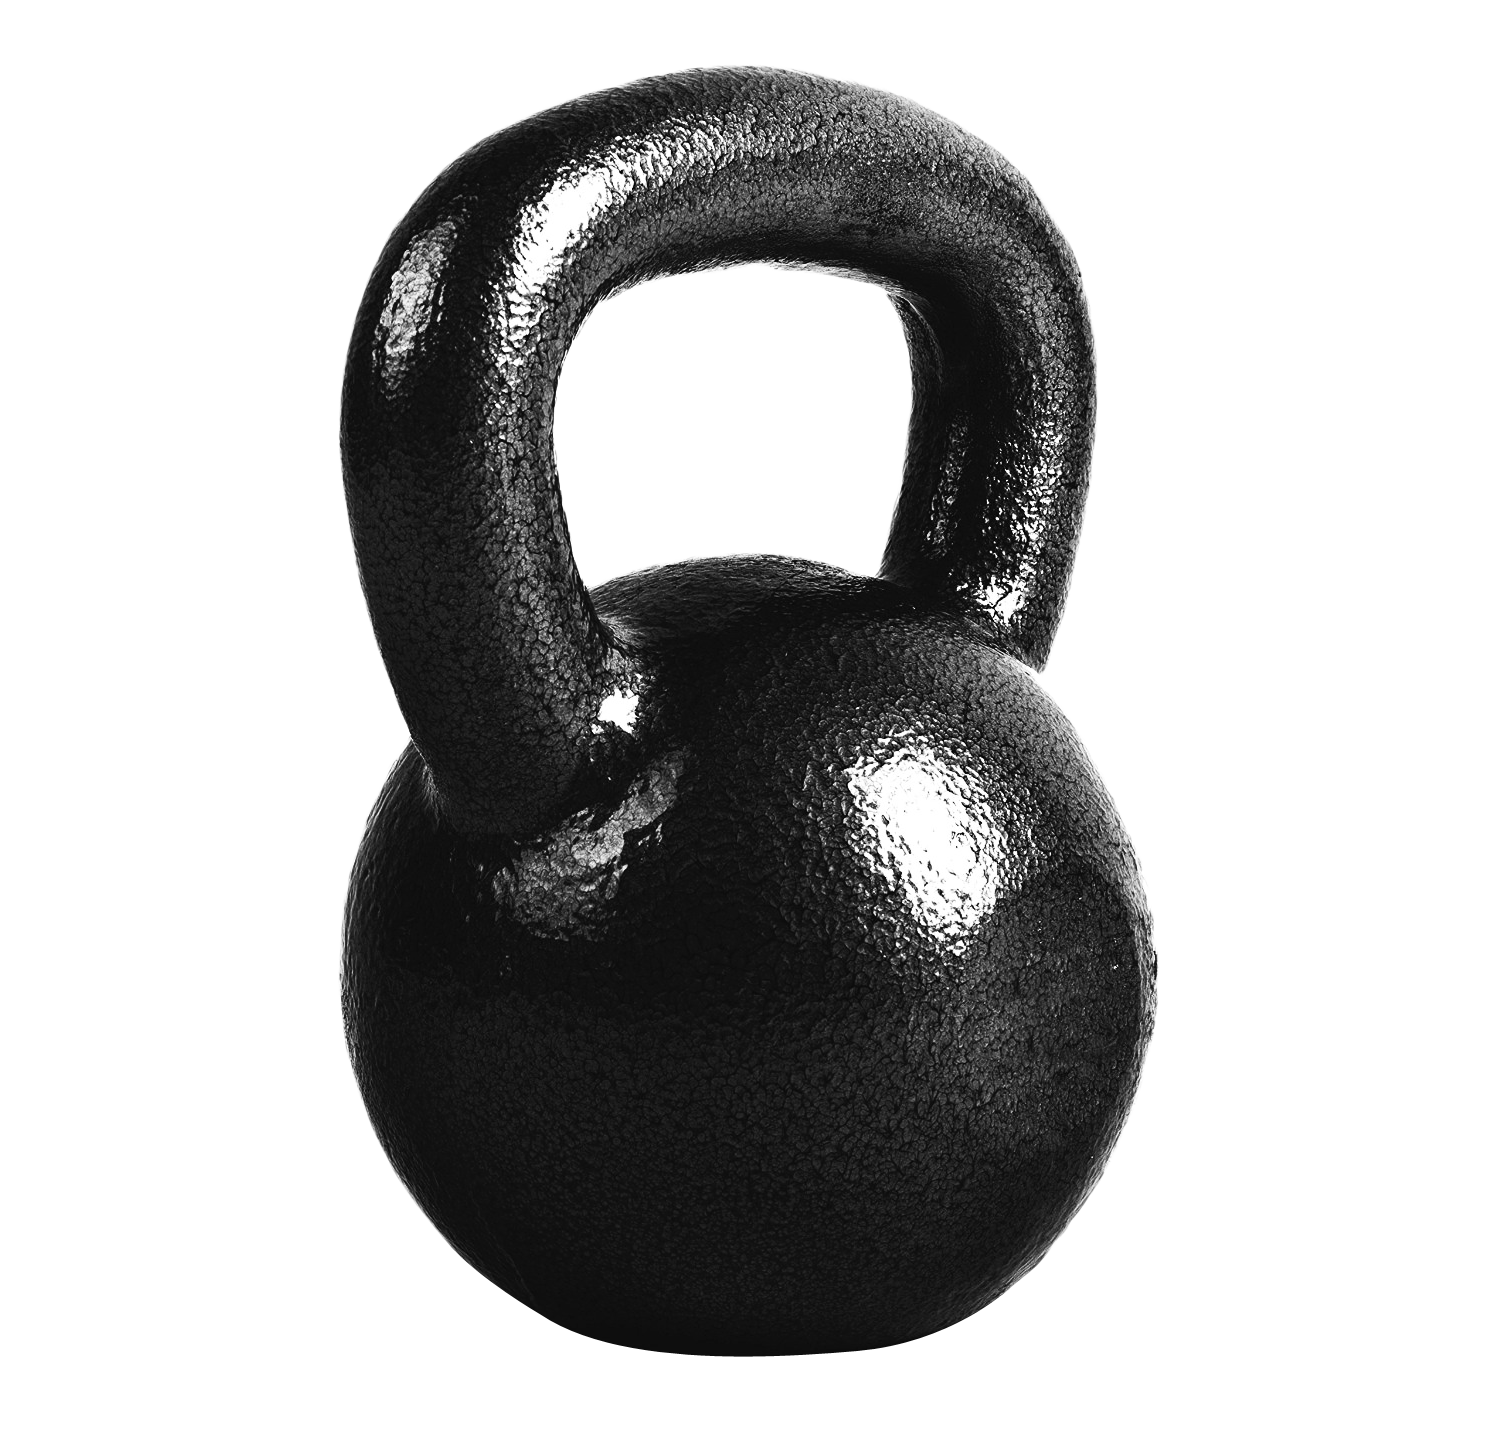 Kettlebell Images PNG Free Photo PNG Image